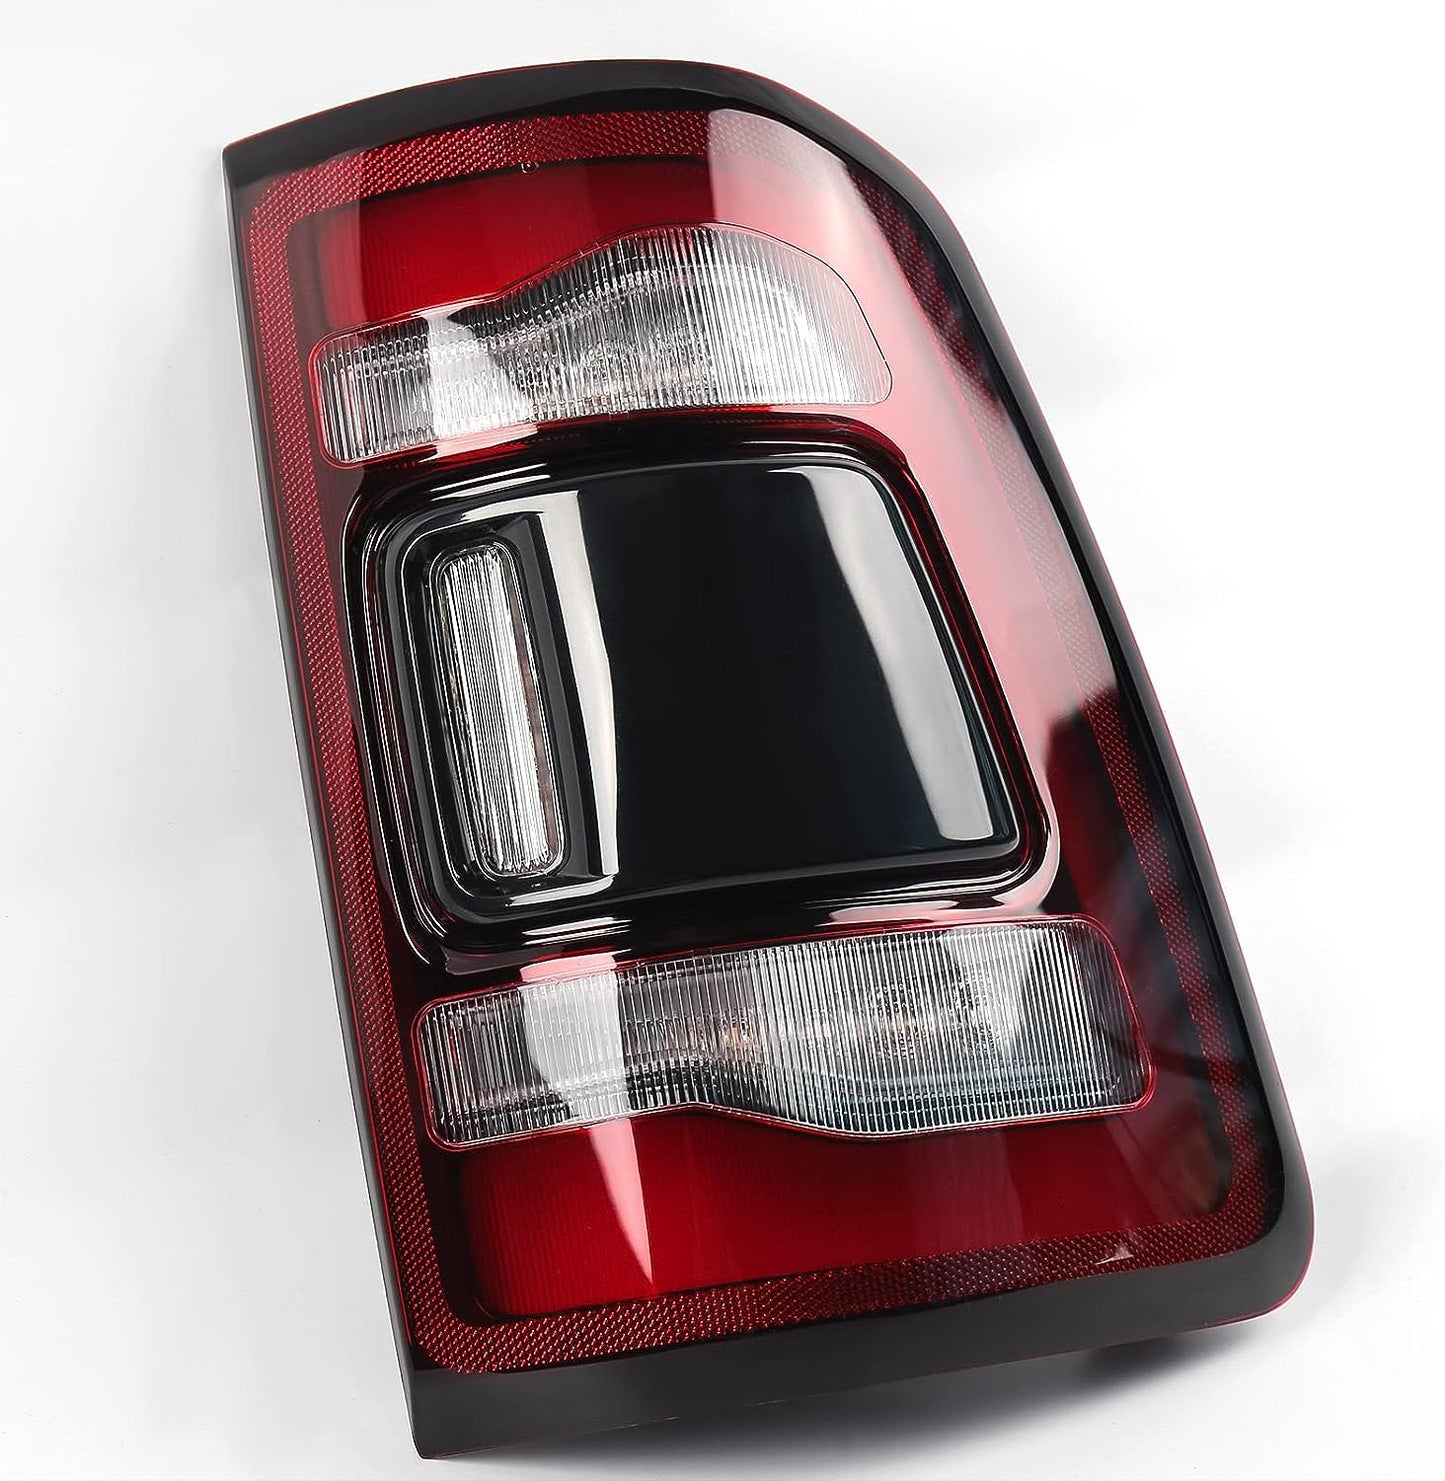 New Upgraded LED Tail Light Assembly for  2019-2022 Dodge Ram 1500